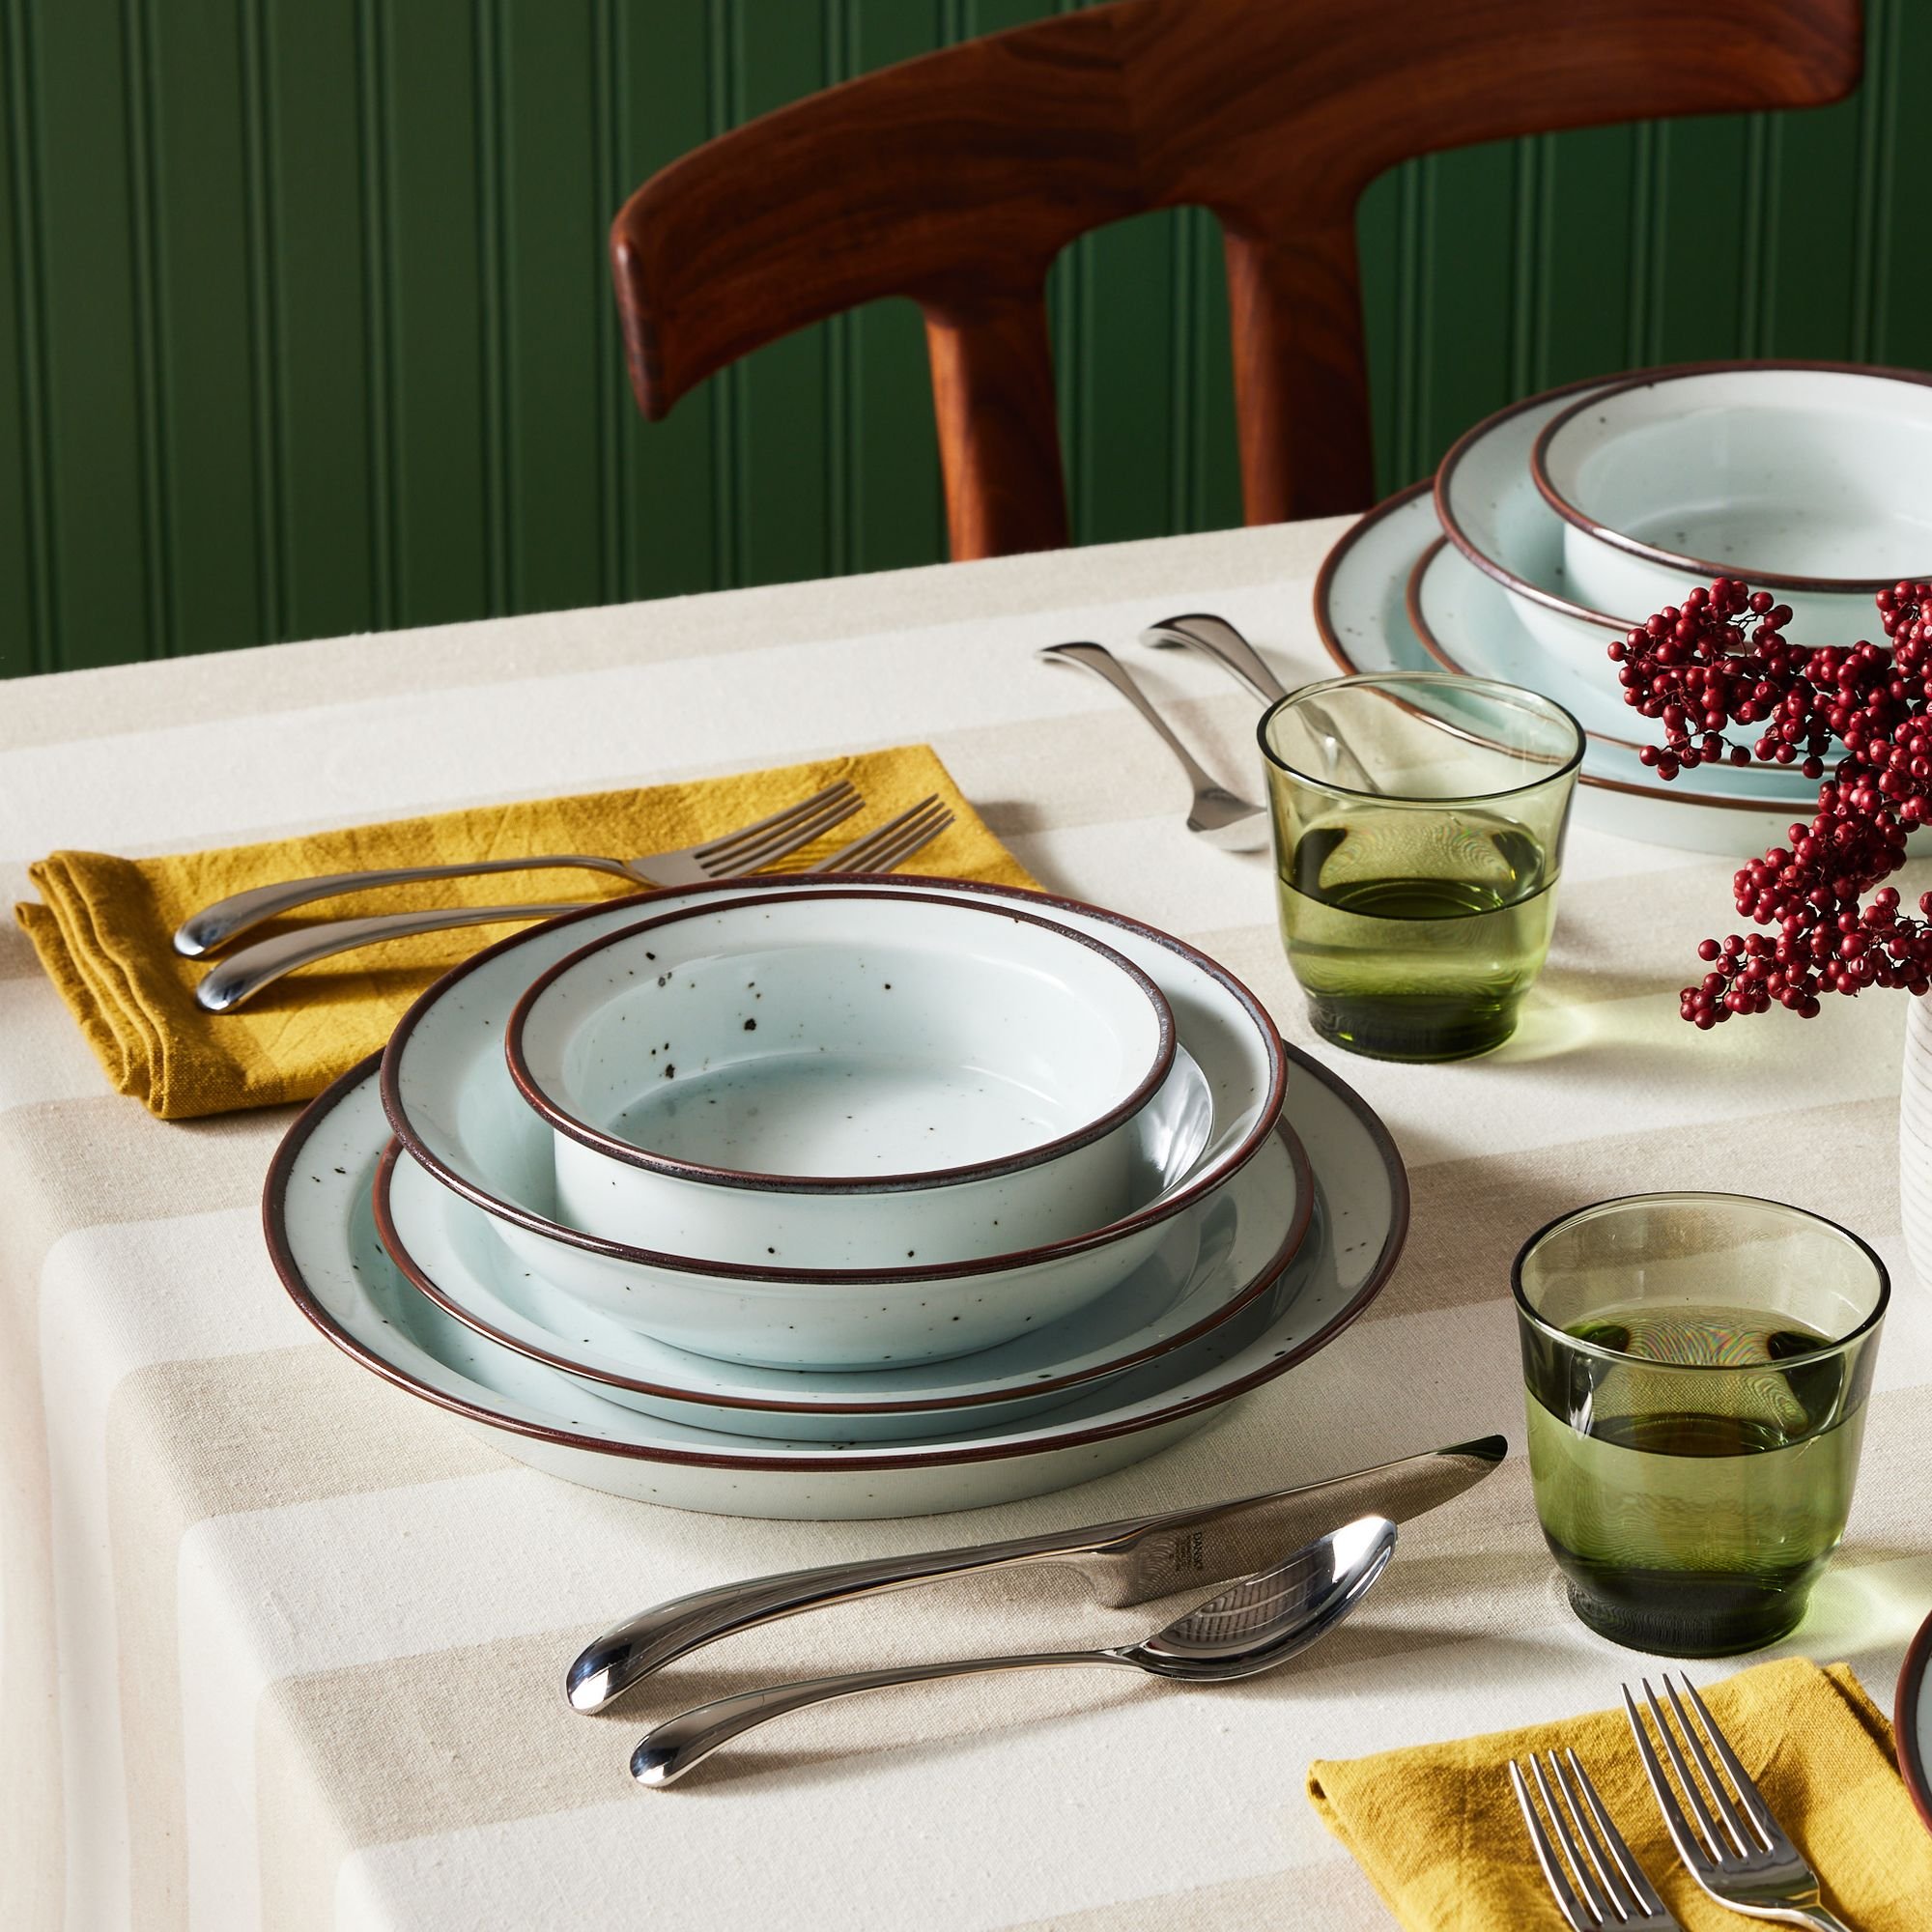 cfb0a902-5d37-4697-9931-f13dd662c231--2023-1025_email_hygge-entertaining_casual-fall-table-generation-dinnerware_high-threequarter-angle-place-setting_generation-dinnerware_1x1_mark-weinberg_0036.jpg